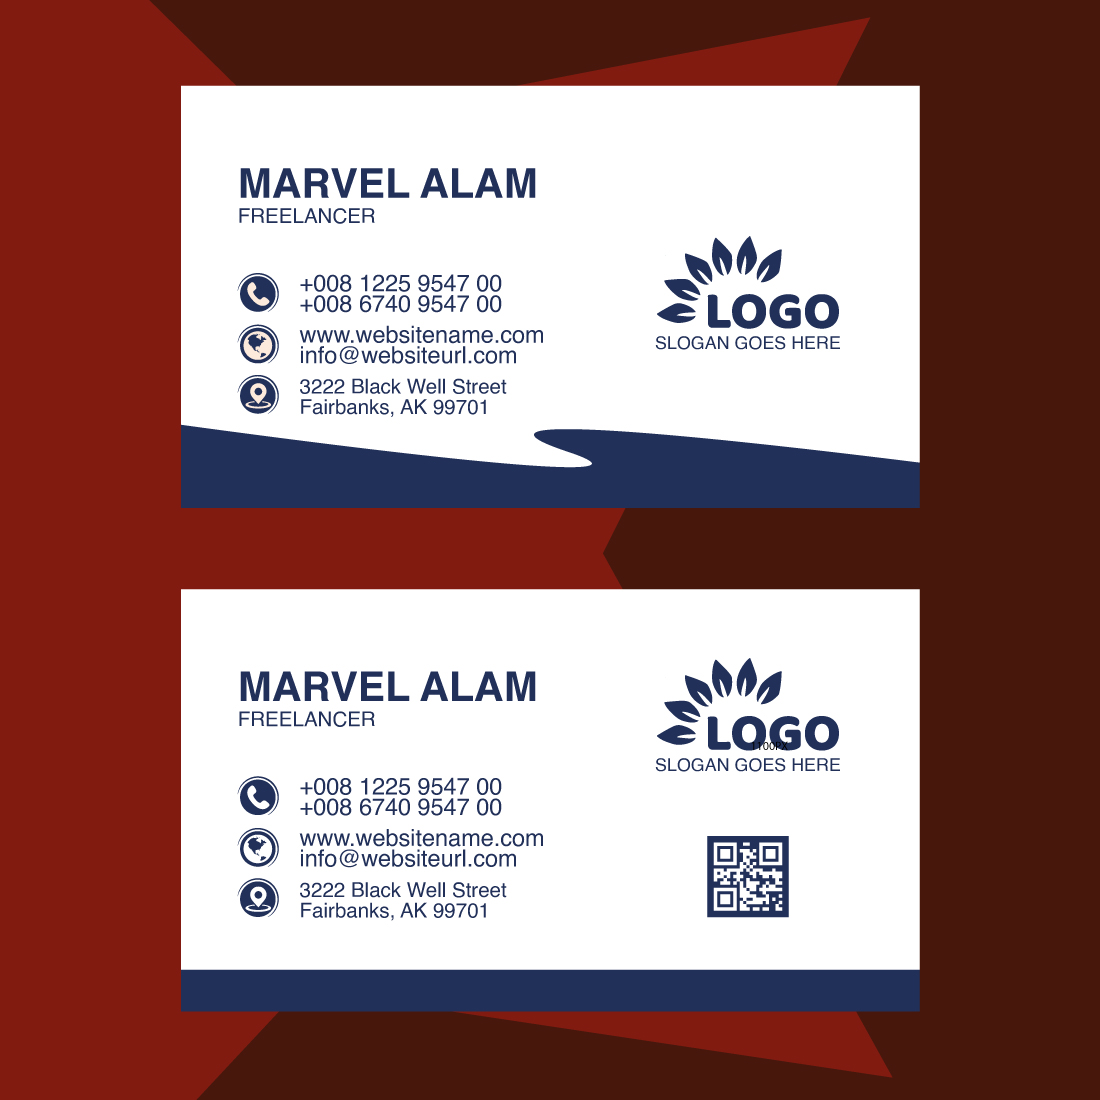 These business card are perfect for your business and other use.